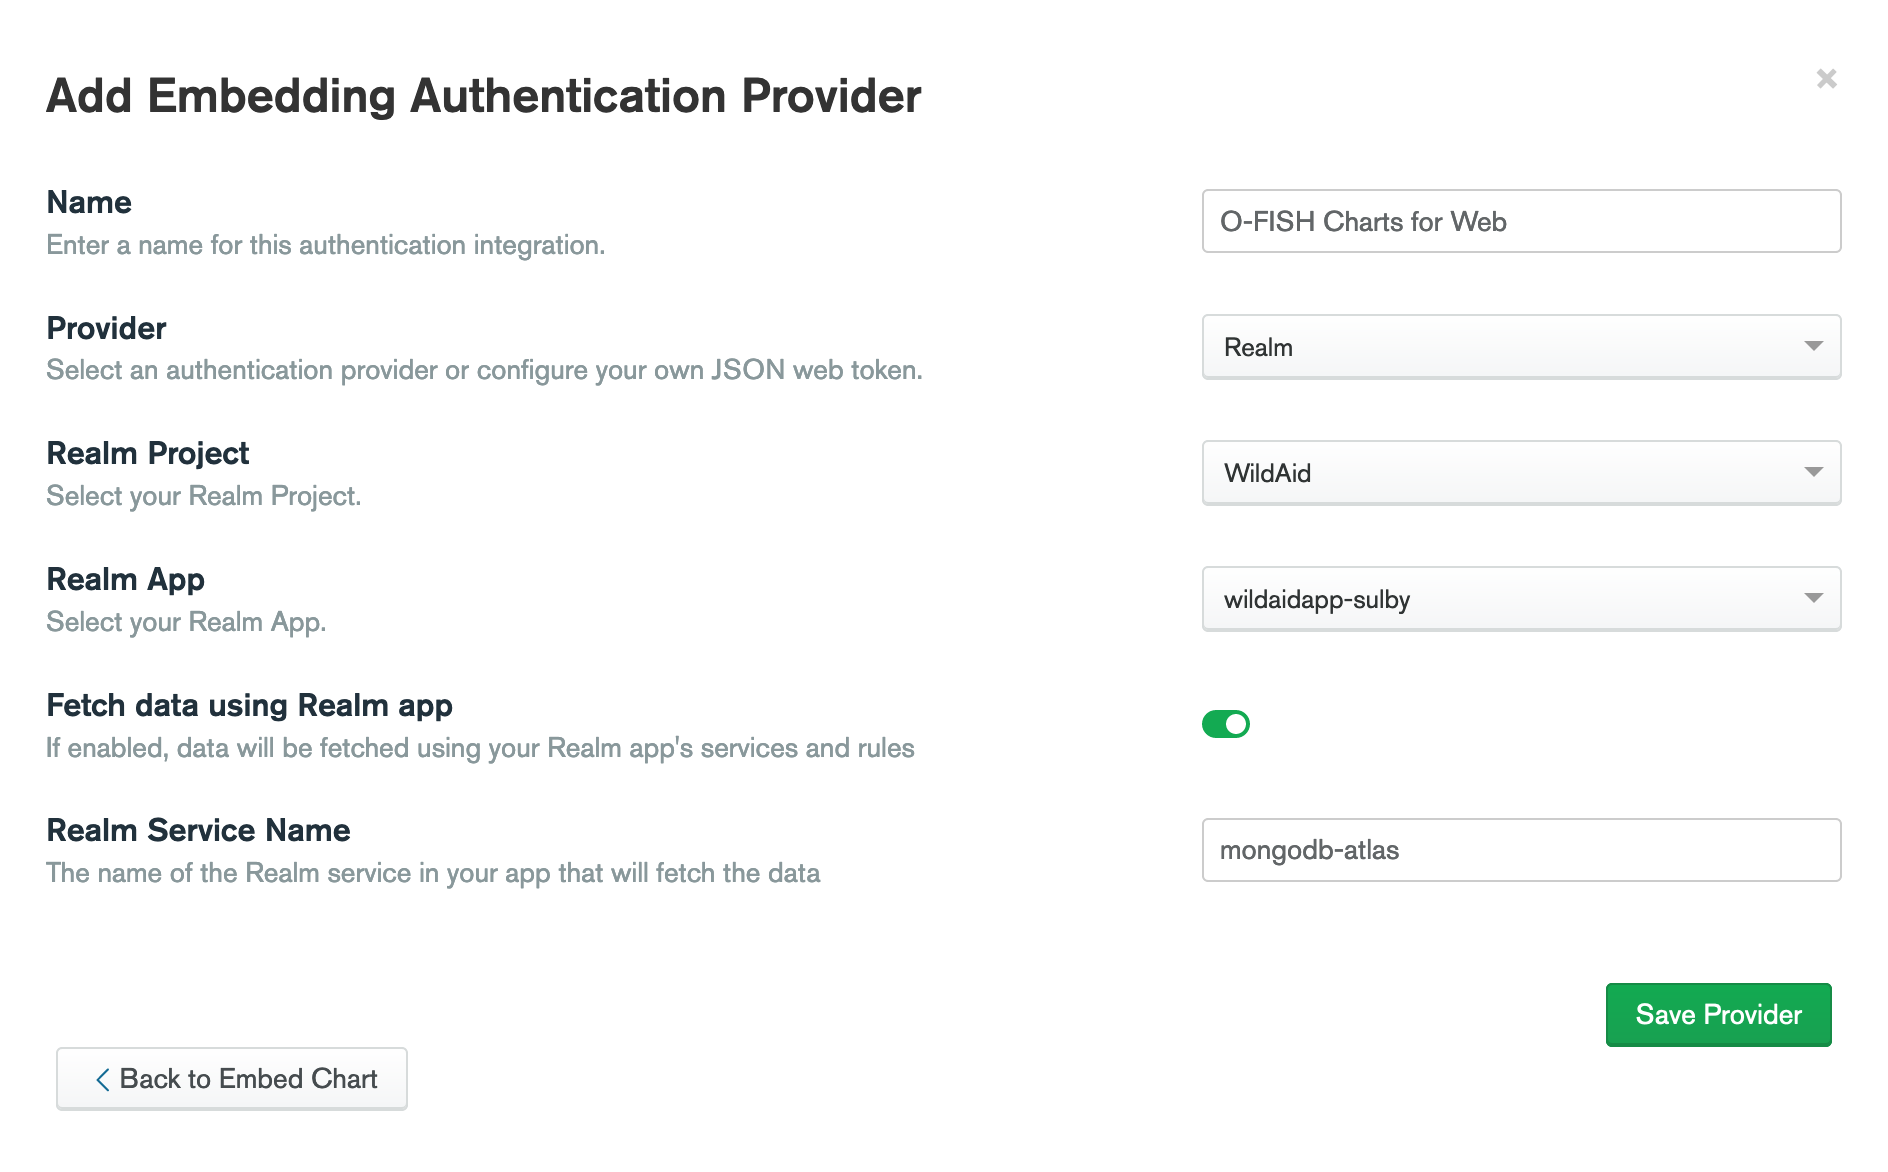 Authentication Provider settings. Name: 'O-FISH Charts for Web', Provider: 'Realm', Realm Project: 'WildAid', Realm App: 'wildaidapp-sulby', Fetch data using Realm app: Turned on, Realm Service Name: 'MongoDB-atlas'